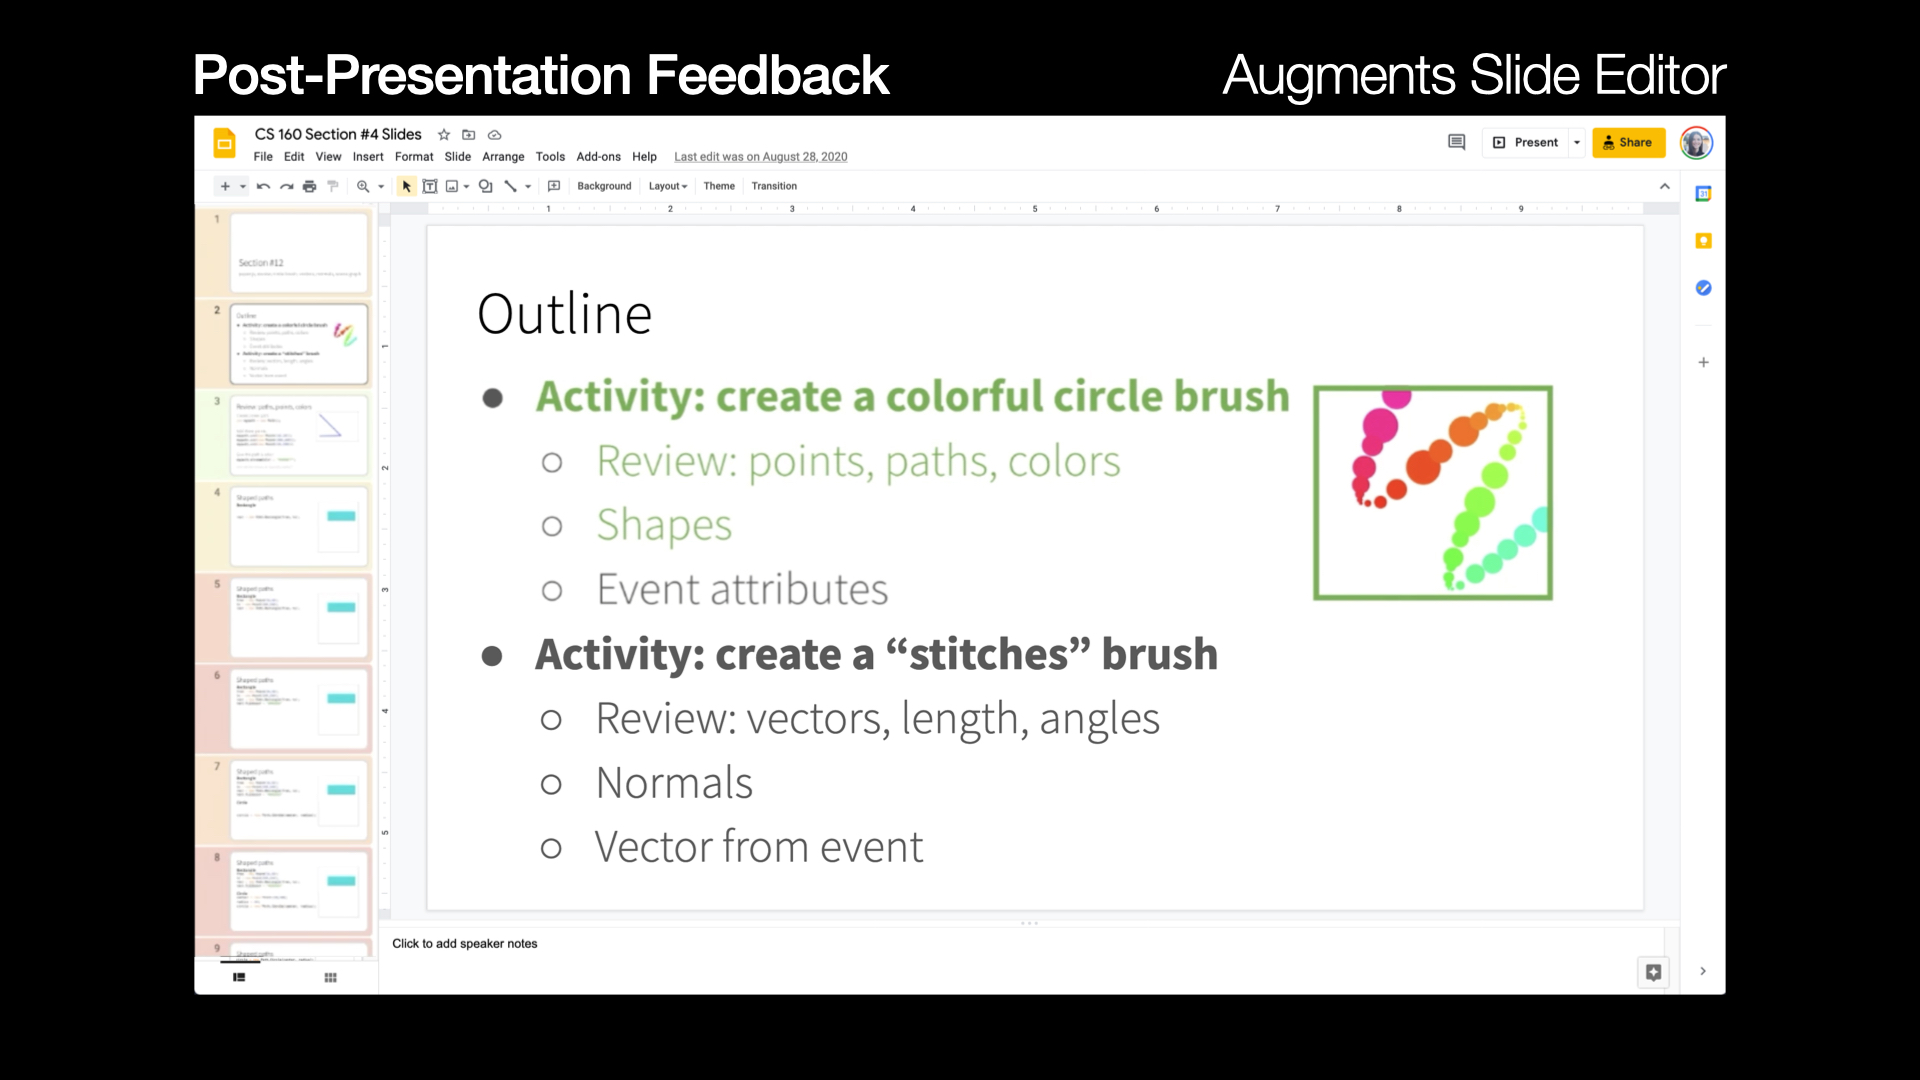 This is the slide that shows the same post-presentation interface as shown in the previous slide. The first bullet text item “Activity: create a colorful circle brush” and its two subitems “Review: points, paths, colors” and “Shapes” are colored in green. The image of a colorful squiggly line is also highlighted with a green border.